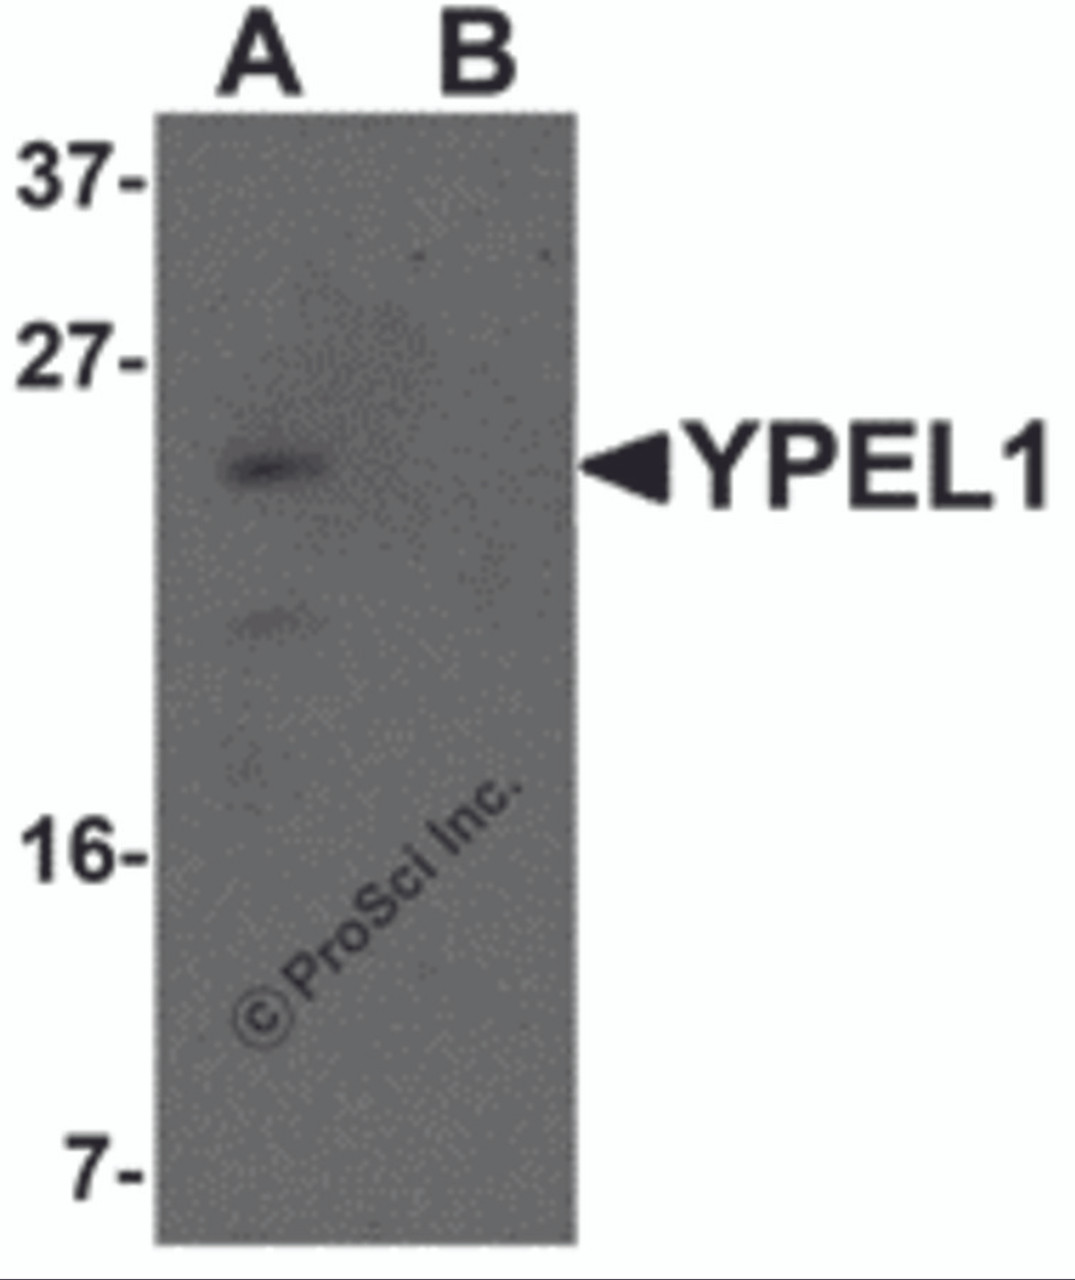 Western blot analysis of YPEL1 in Hela cell lysate with YPEL1 antibody at 1 &#956;g/mL in (A) the absence and (B) the presence of blocking peptide.